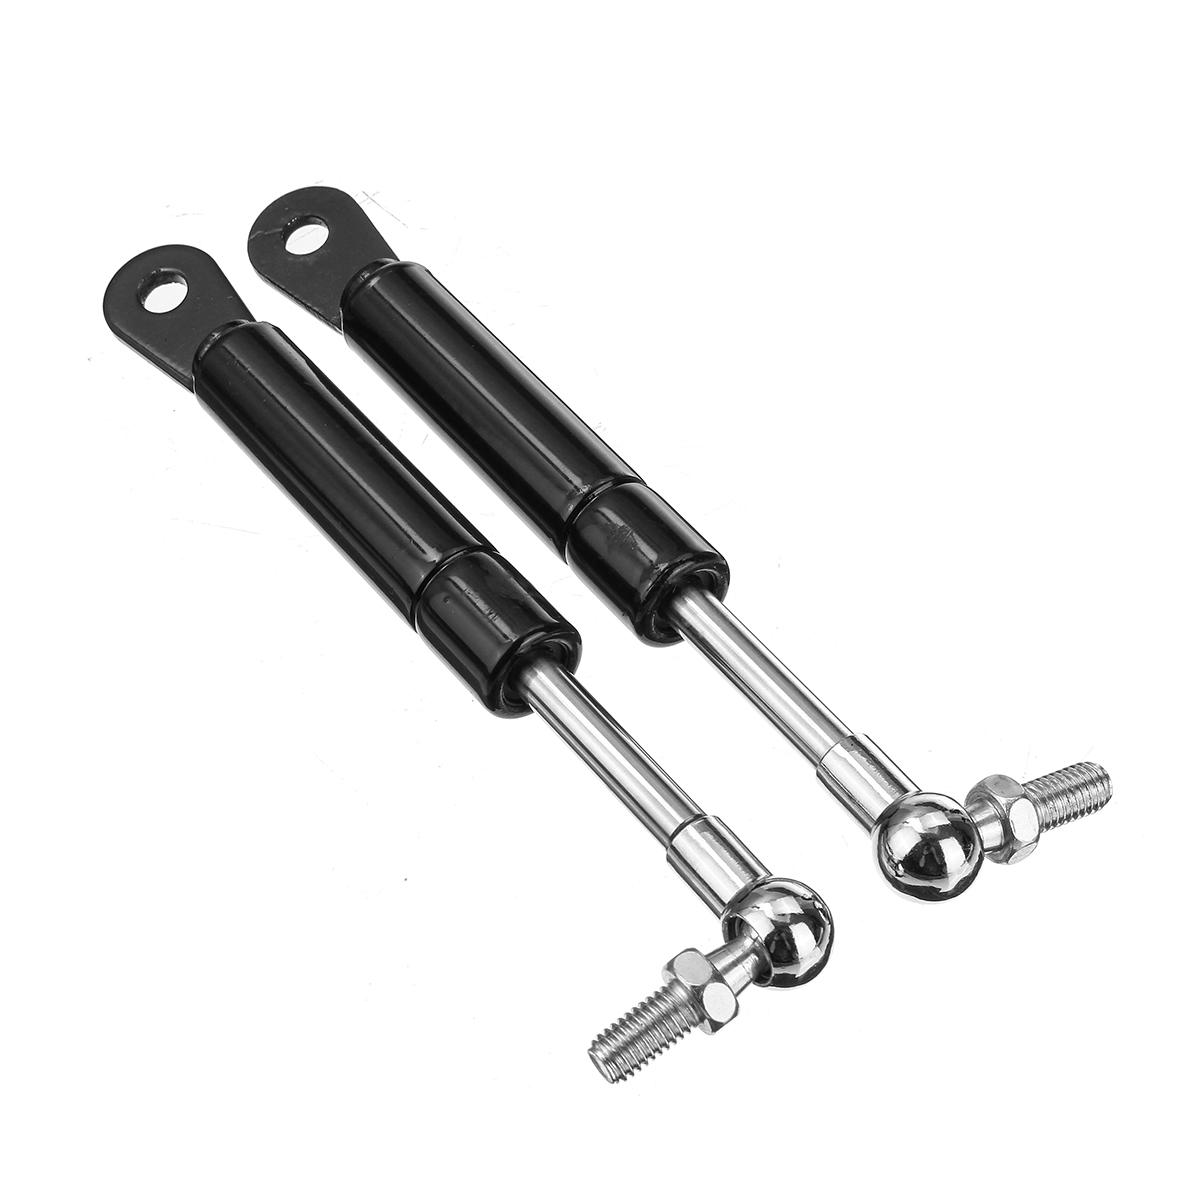 

Struts Arms Lift Supports For Yamaha T Max Tmax 500 2009 530 2015 2016 2017 Shock Absorber Lift Seat